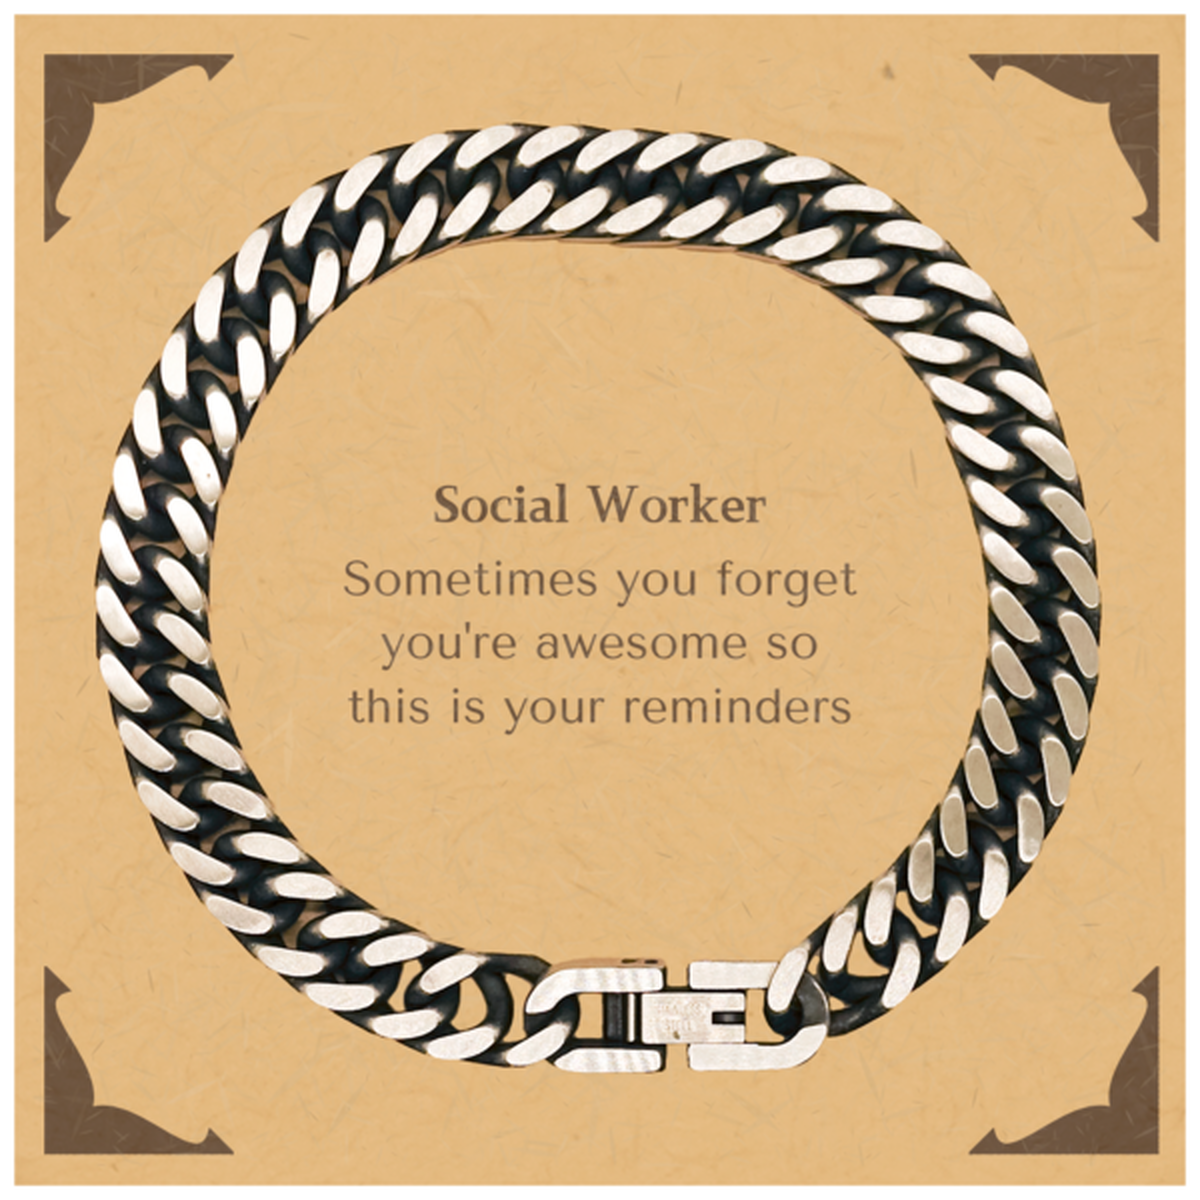 Sentimental Social Worker Cuban Link Chain Bracelet, Social Worker Sometimes you forget you're awesome so this is your reminders, Graduation Christmas Birthday Gifts for Social Worker, Men, Women, Coworkers